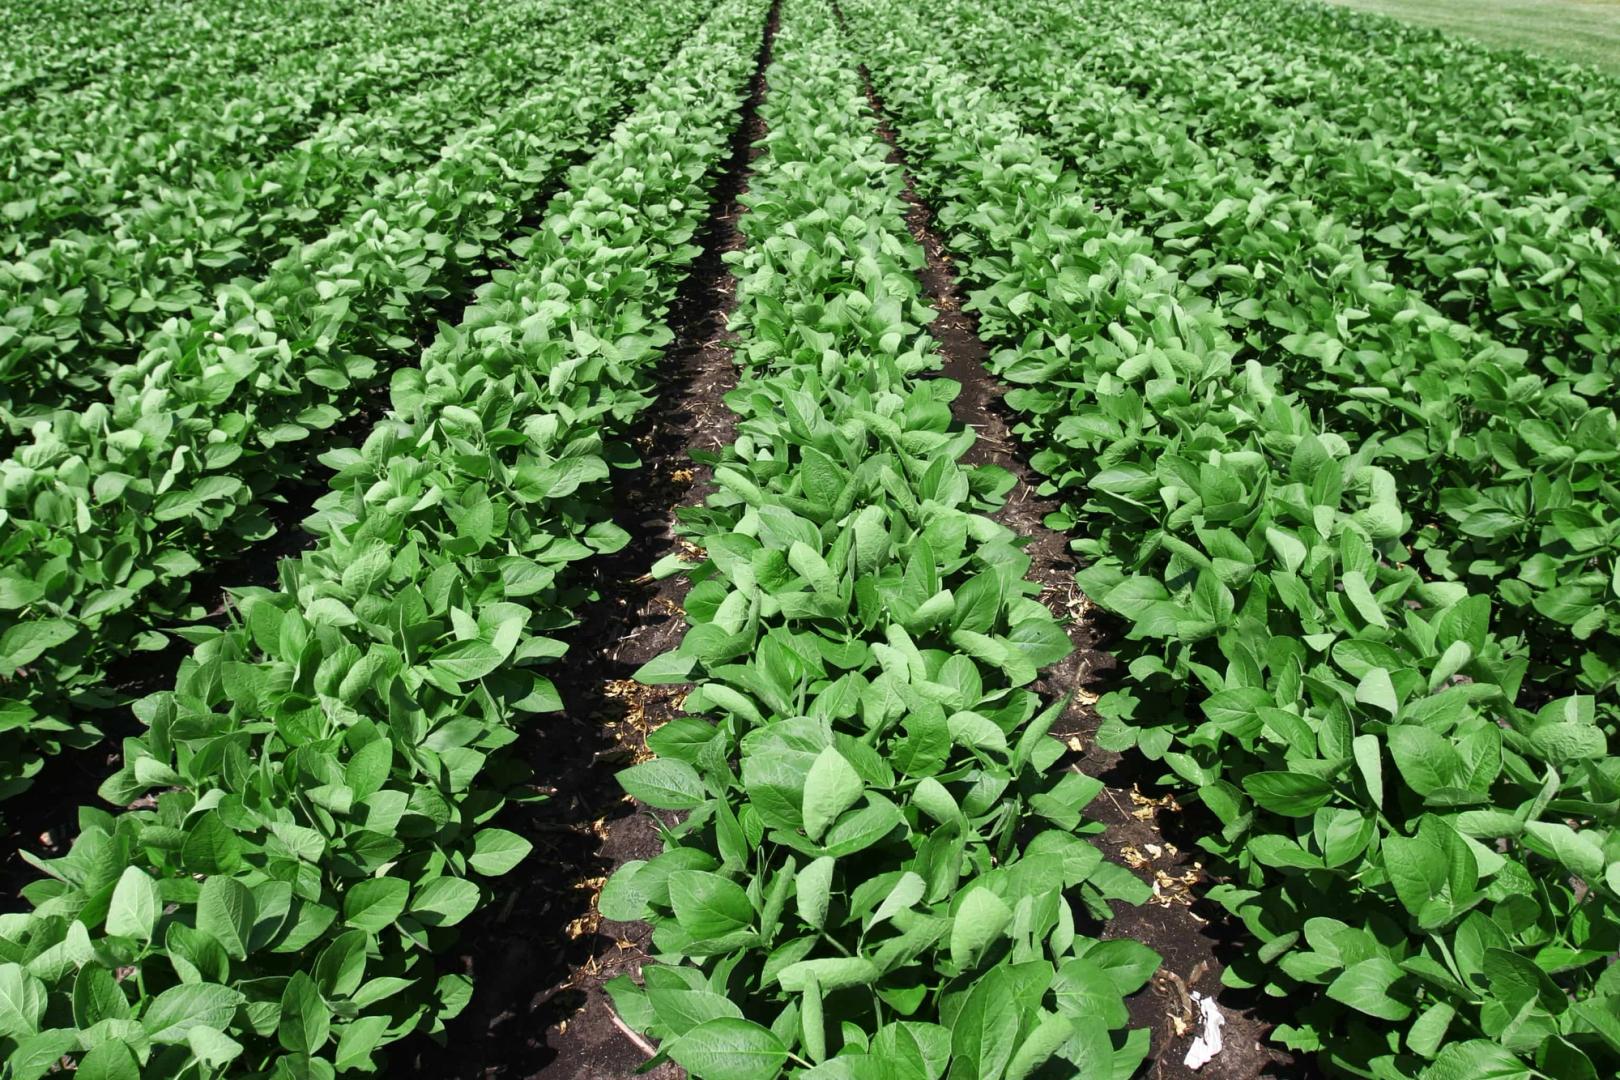 Soybeans - Conventional